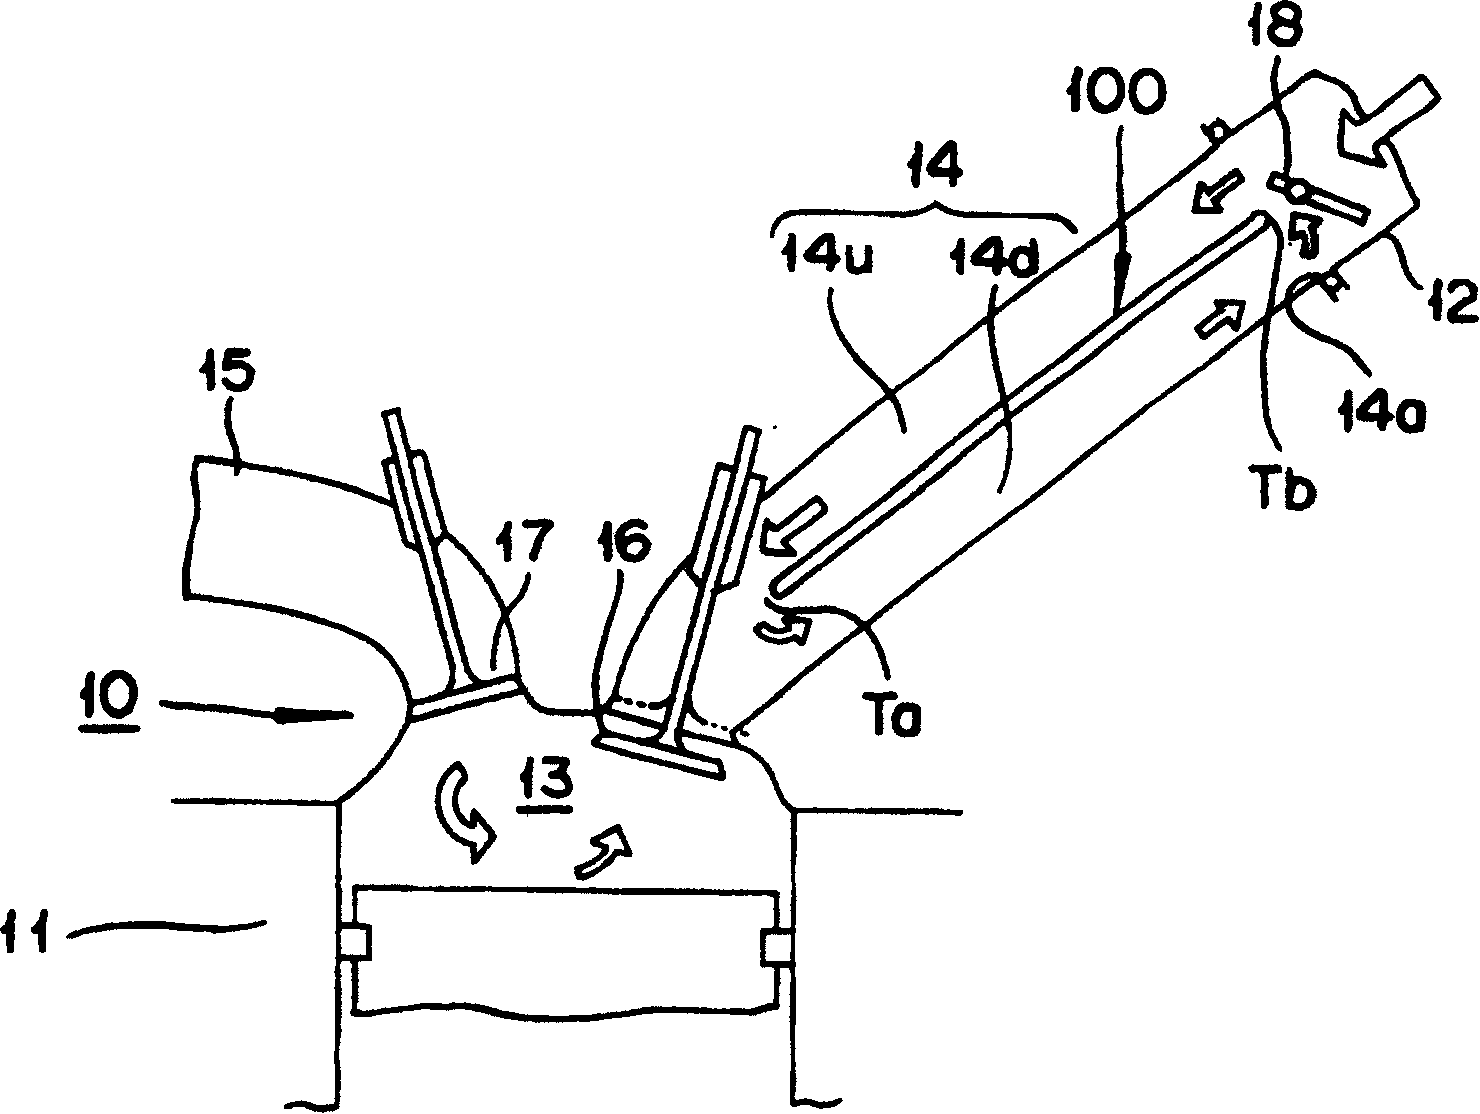 Divider plate for an inlet port, sand core for forming an inlet port, and cylinder head